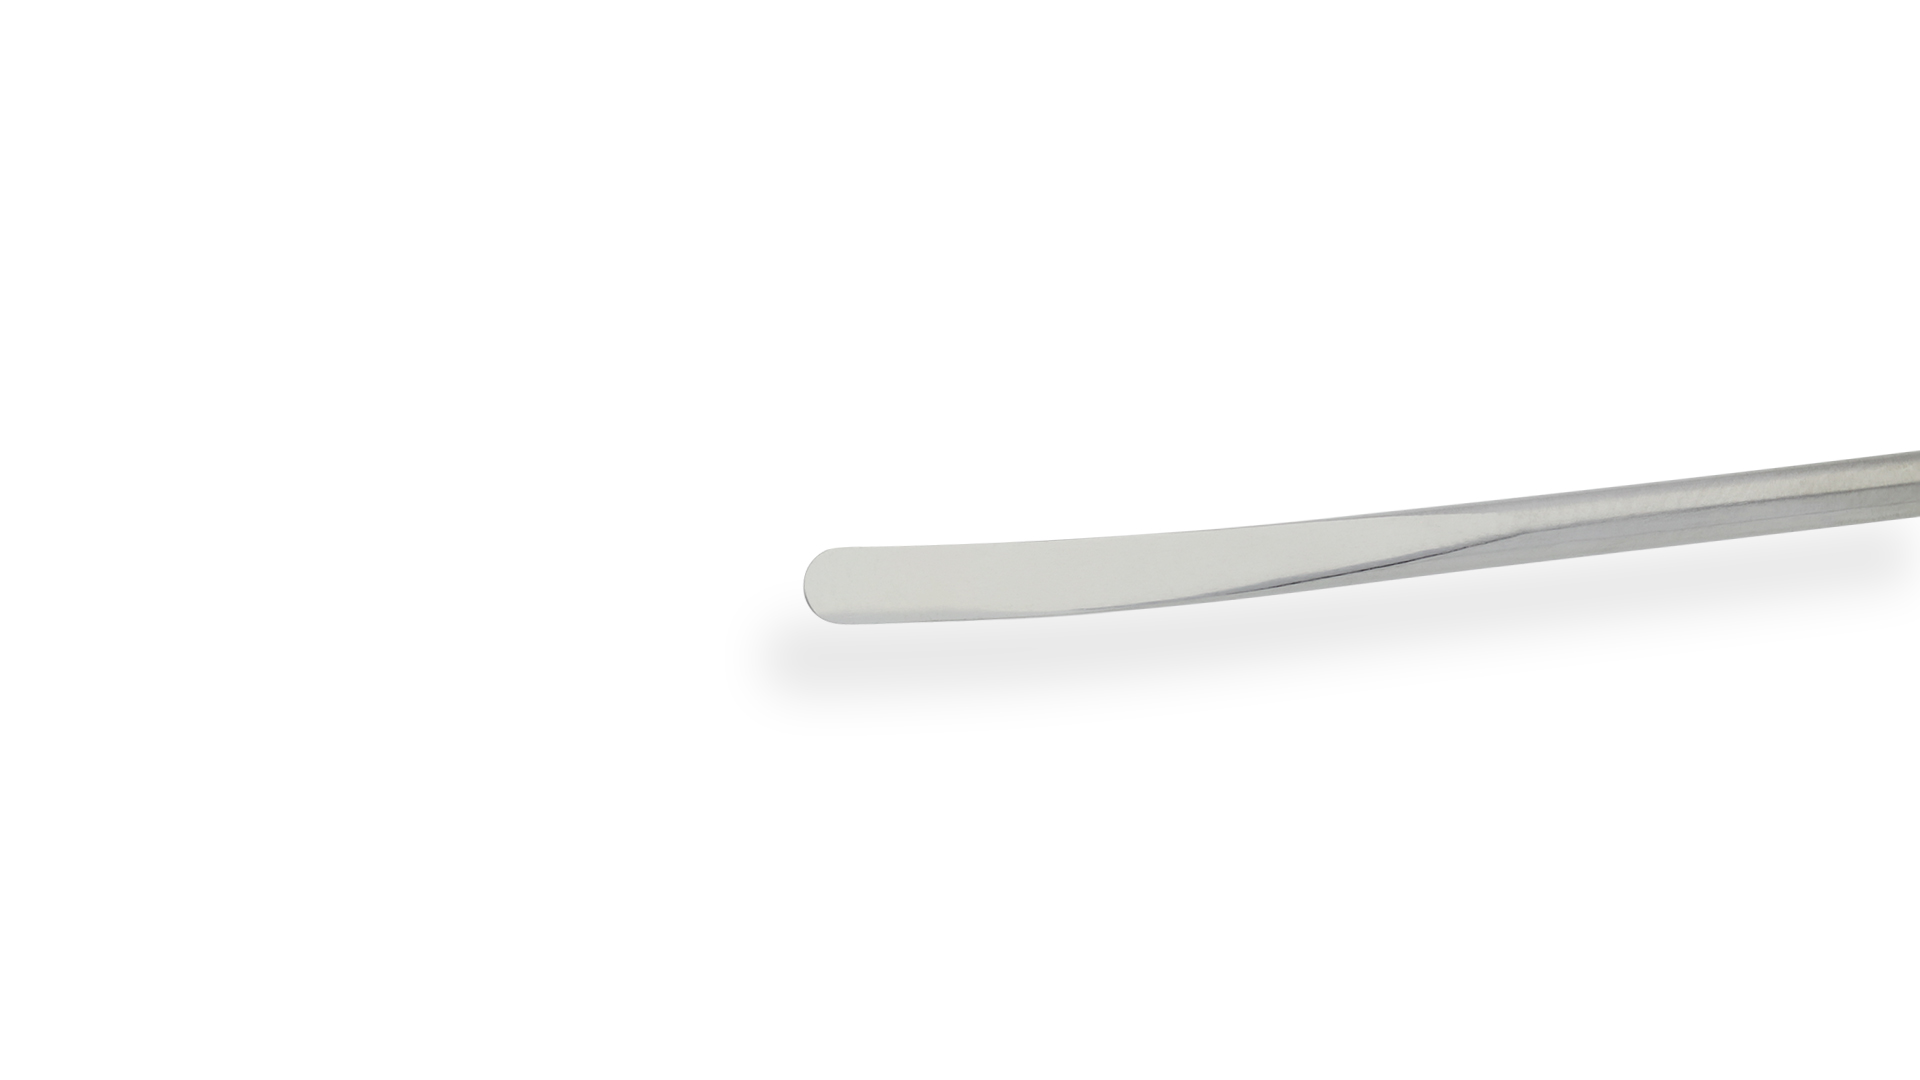 Spatula Dissector - 1.75mm tip